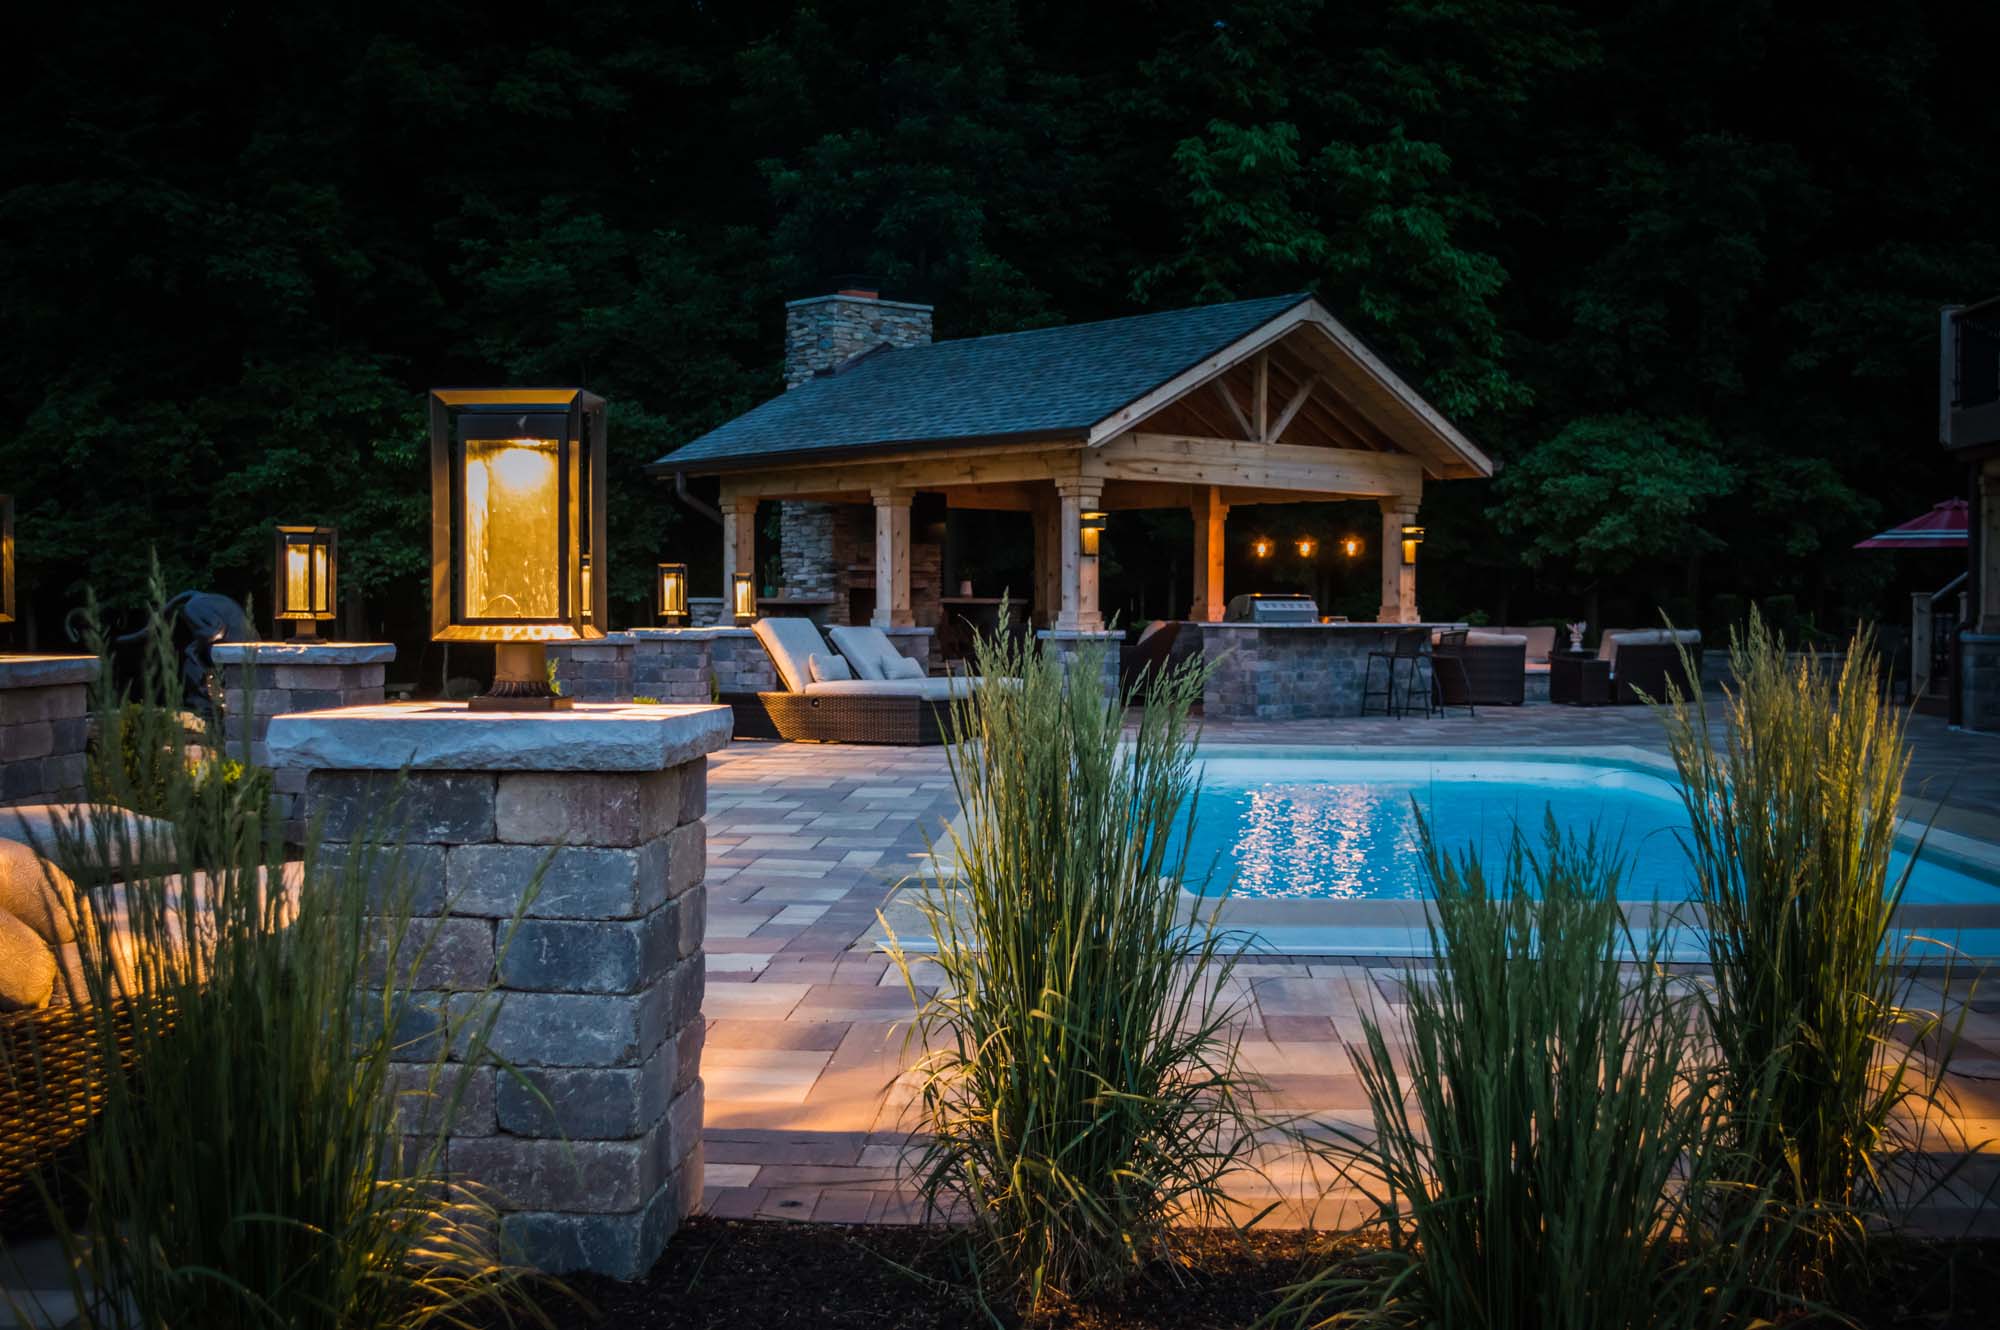 Outdoor living pool structure with fireplace and landscape lighting